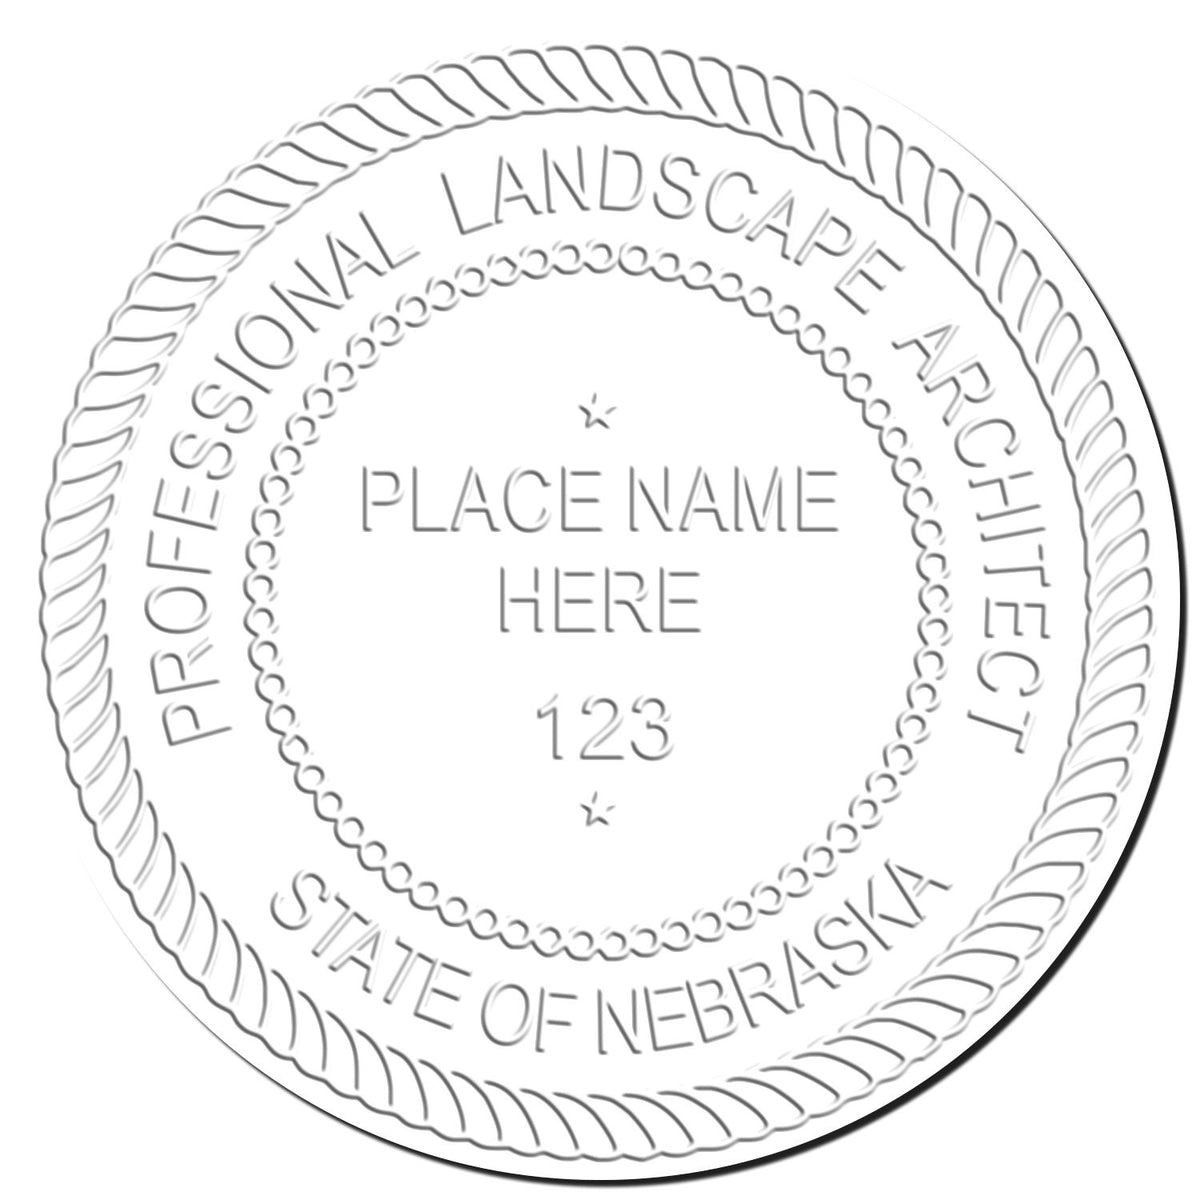 This paper is stamped with a sample imprint of the Soft Pocket Nebraska Landscape Architect Embosser, signifying its quality and reliability.